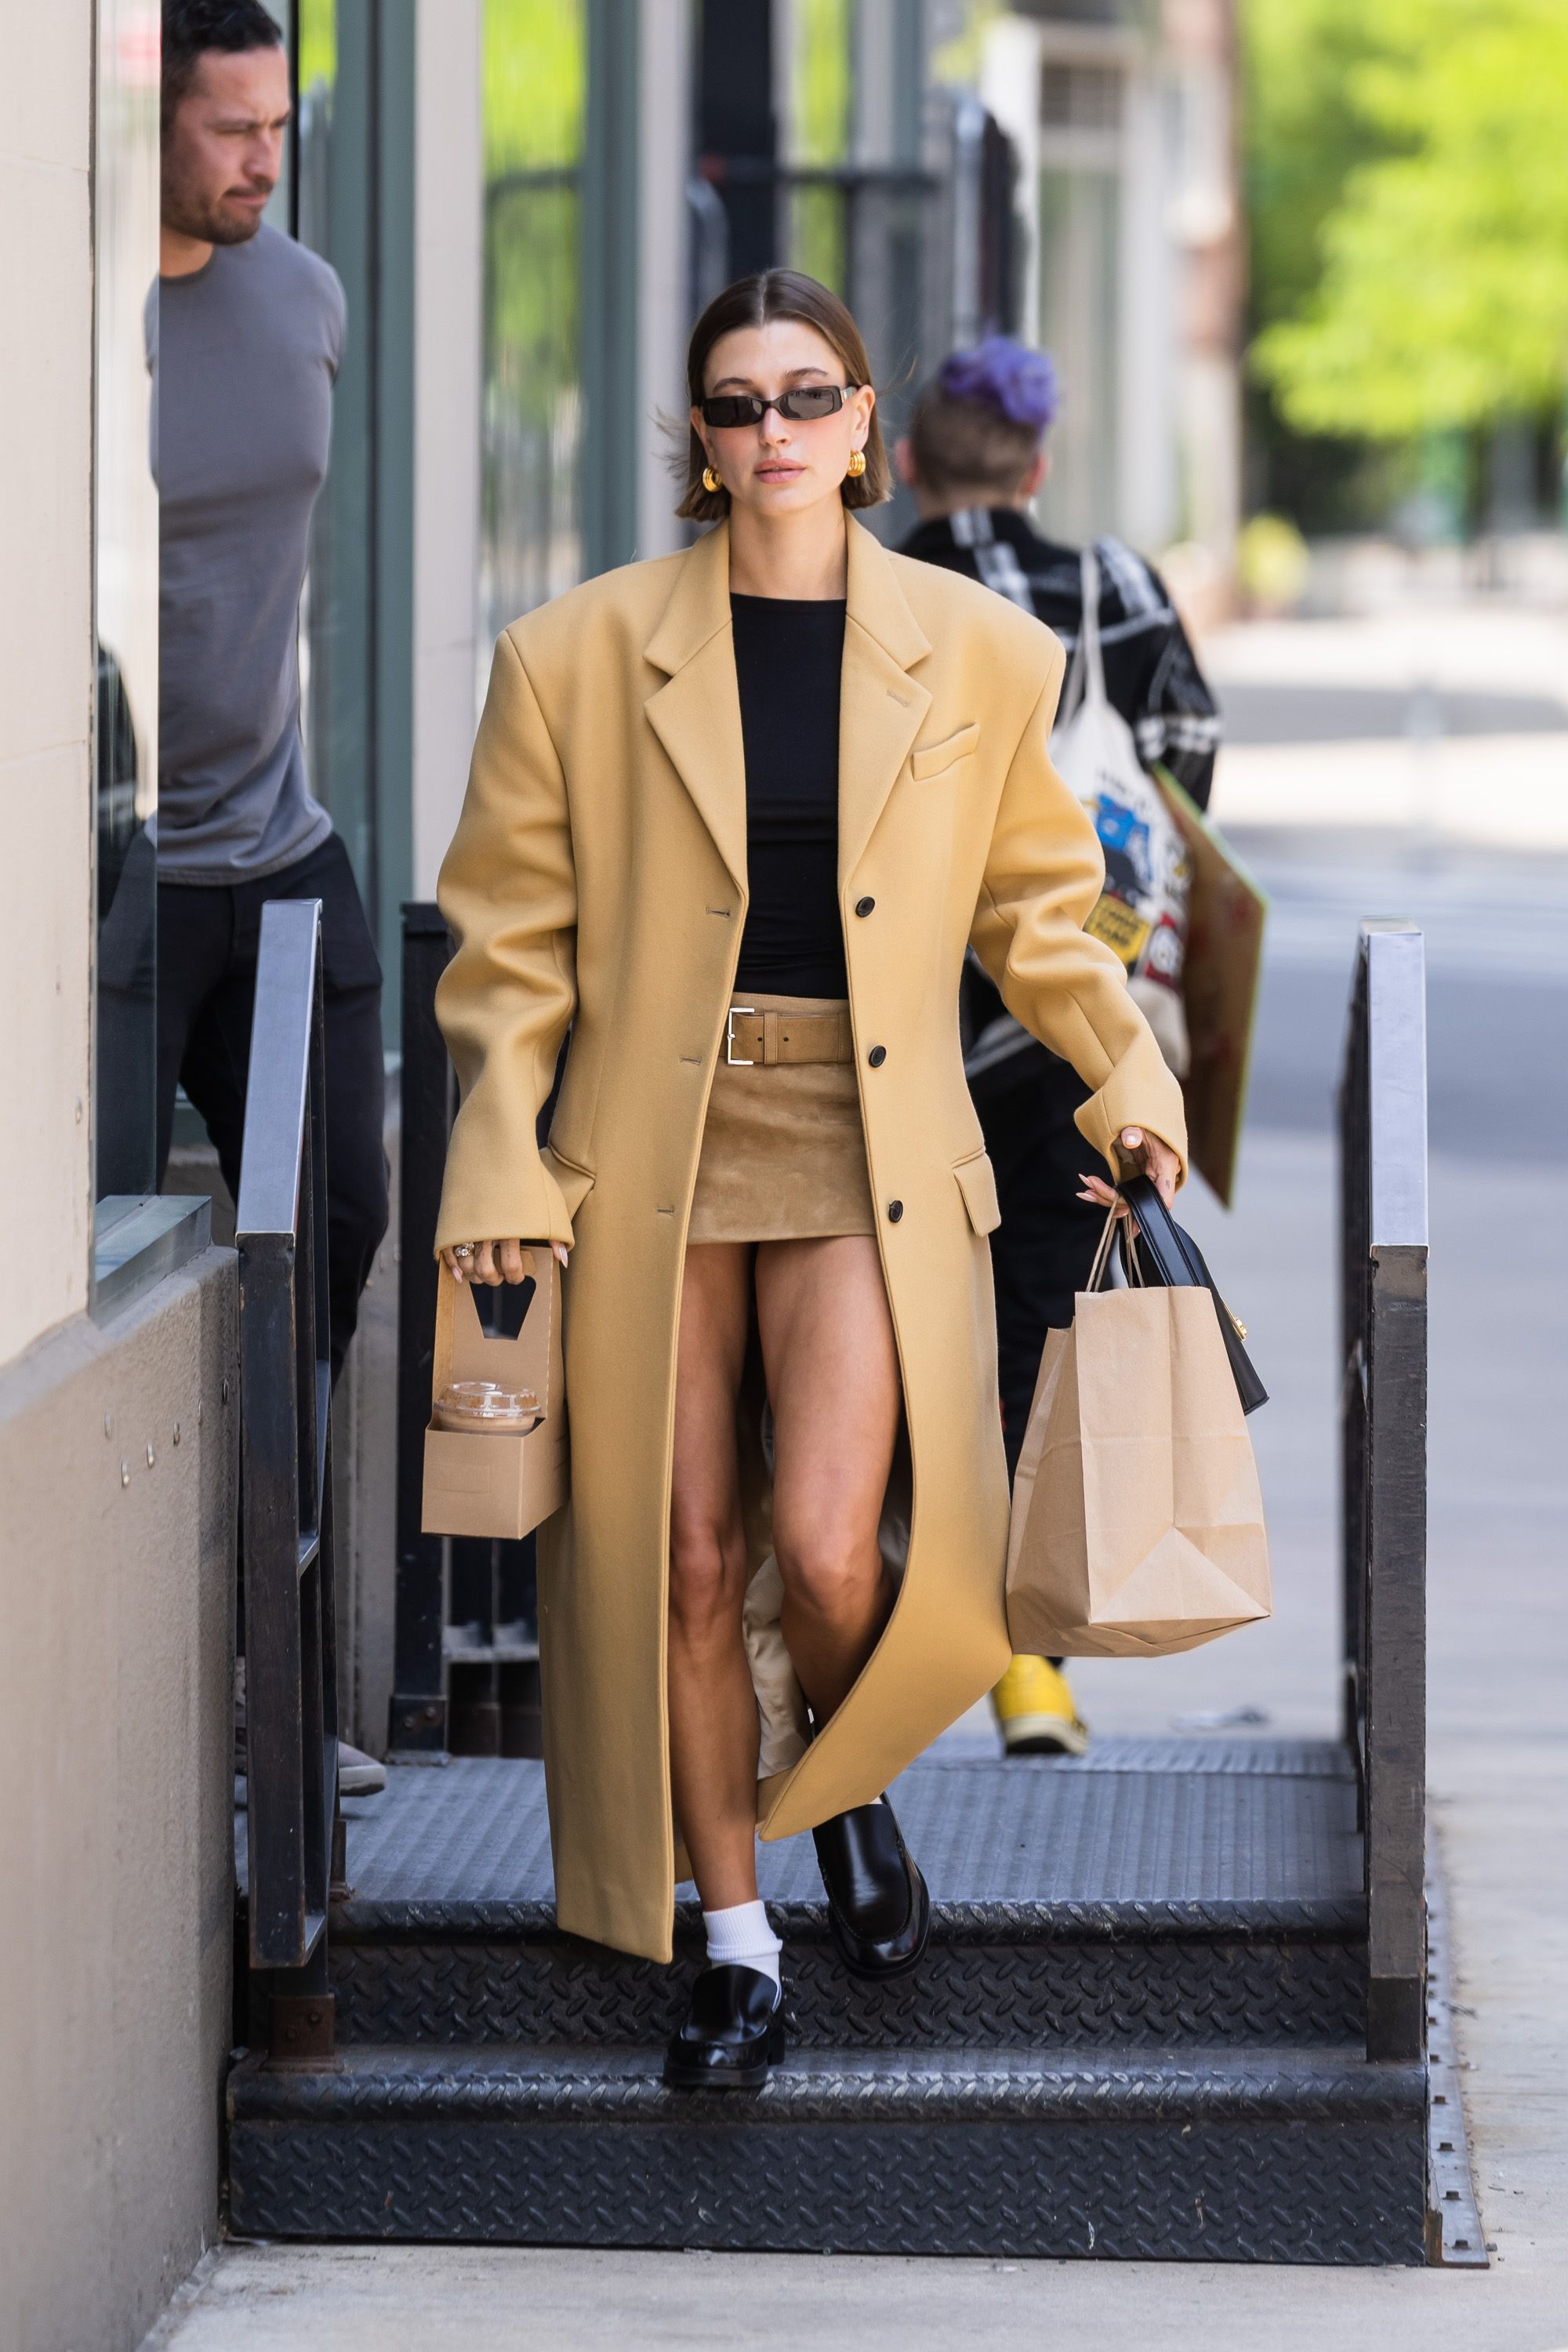 Hailey Bieber Wore an Open Blazer, Barely-There Bra, and Nikes in